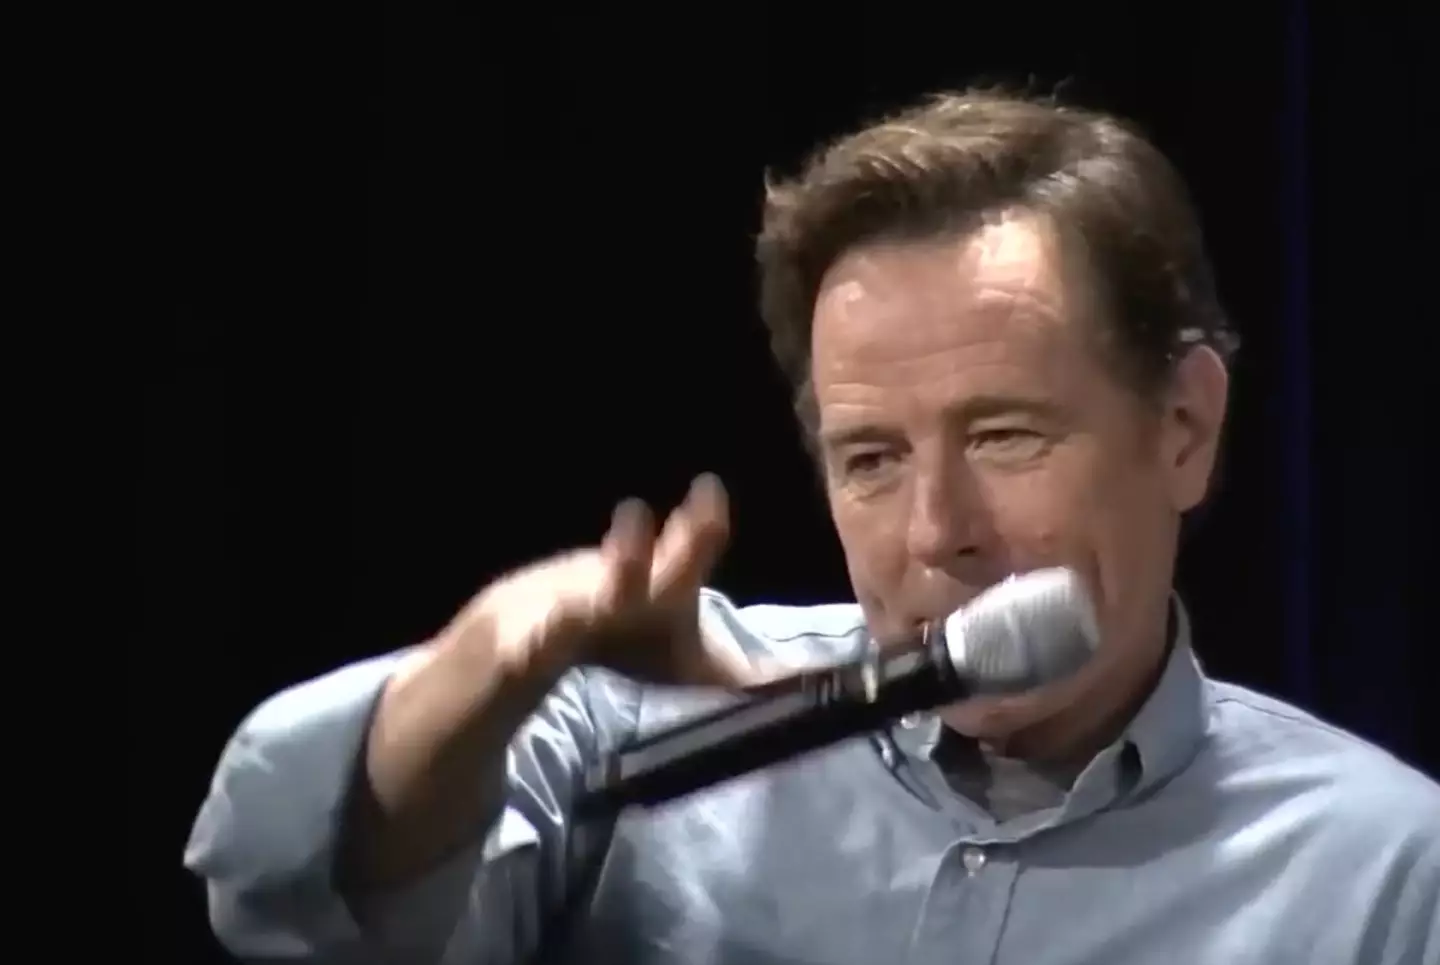 Cranston dropped the mic after the brutal quip.